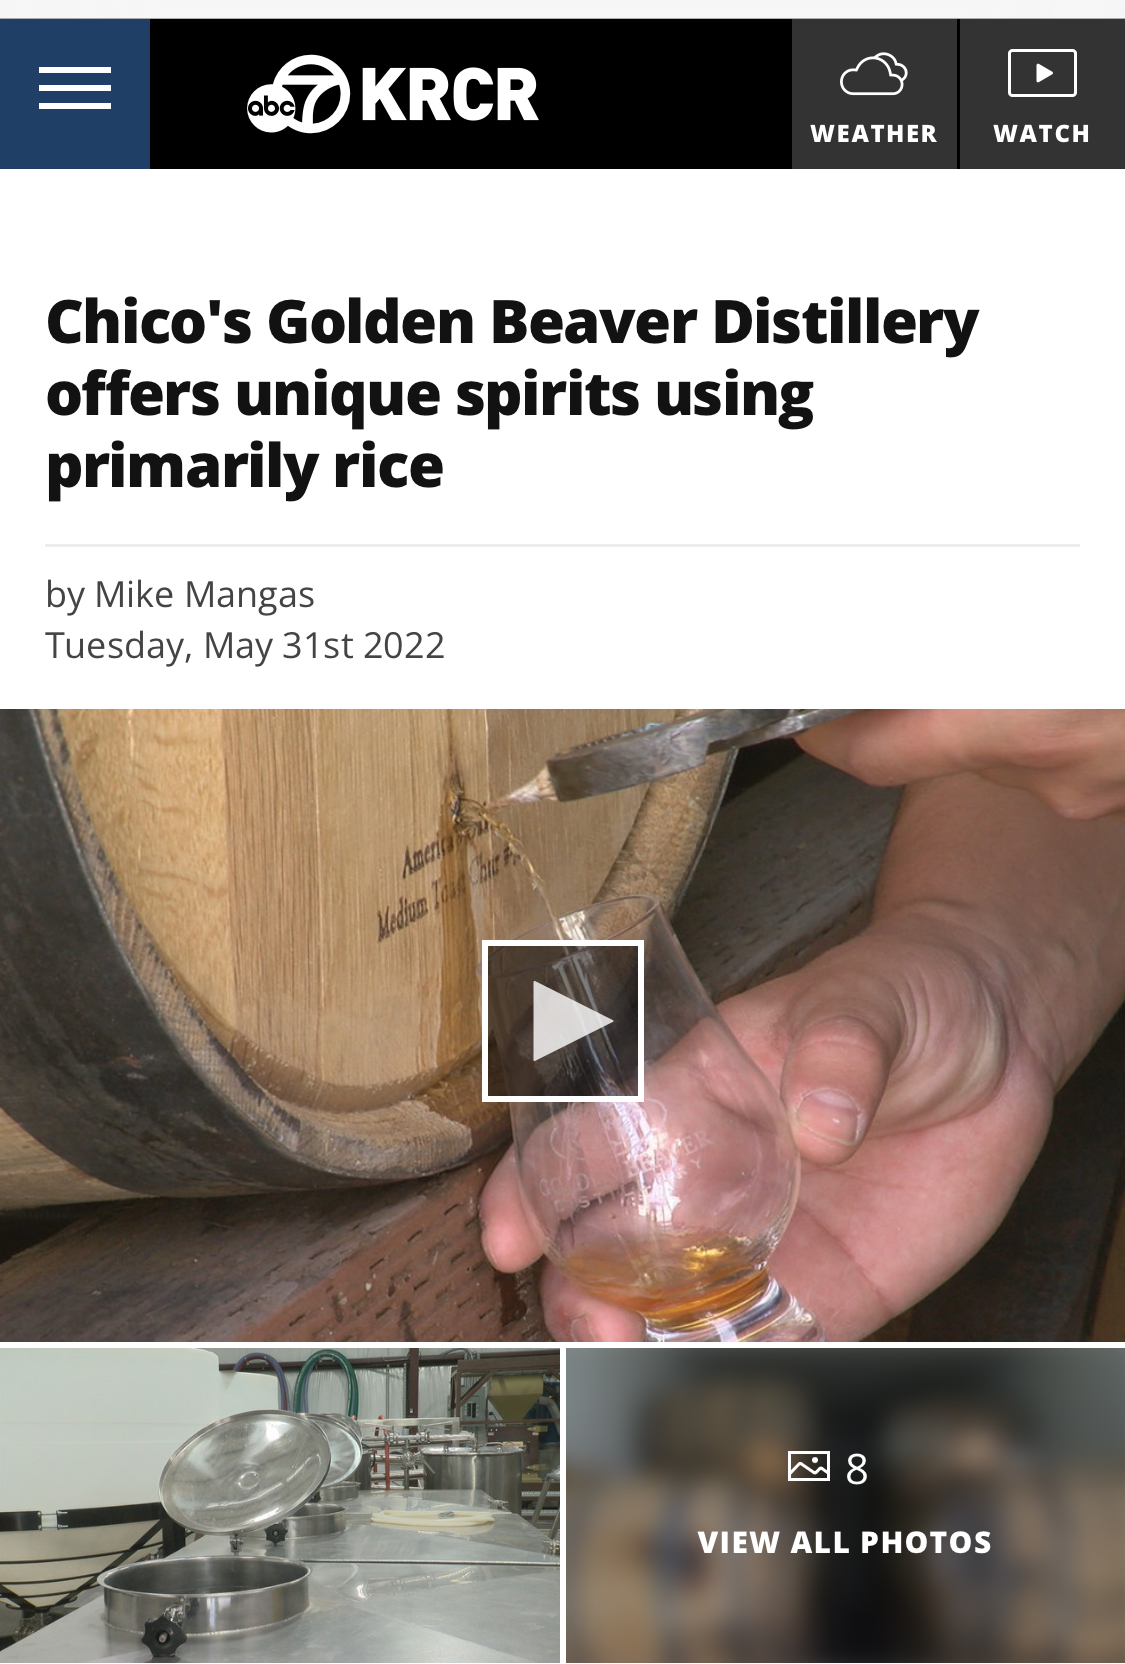 image of news article featuring Golden Beaver Distillery on KRCR